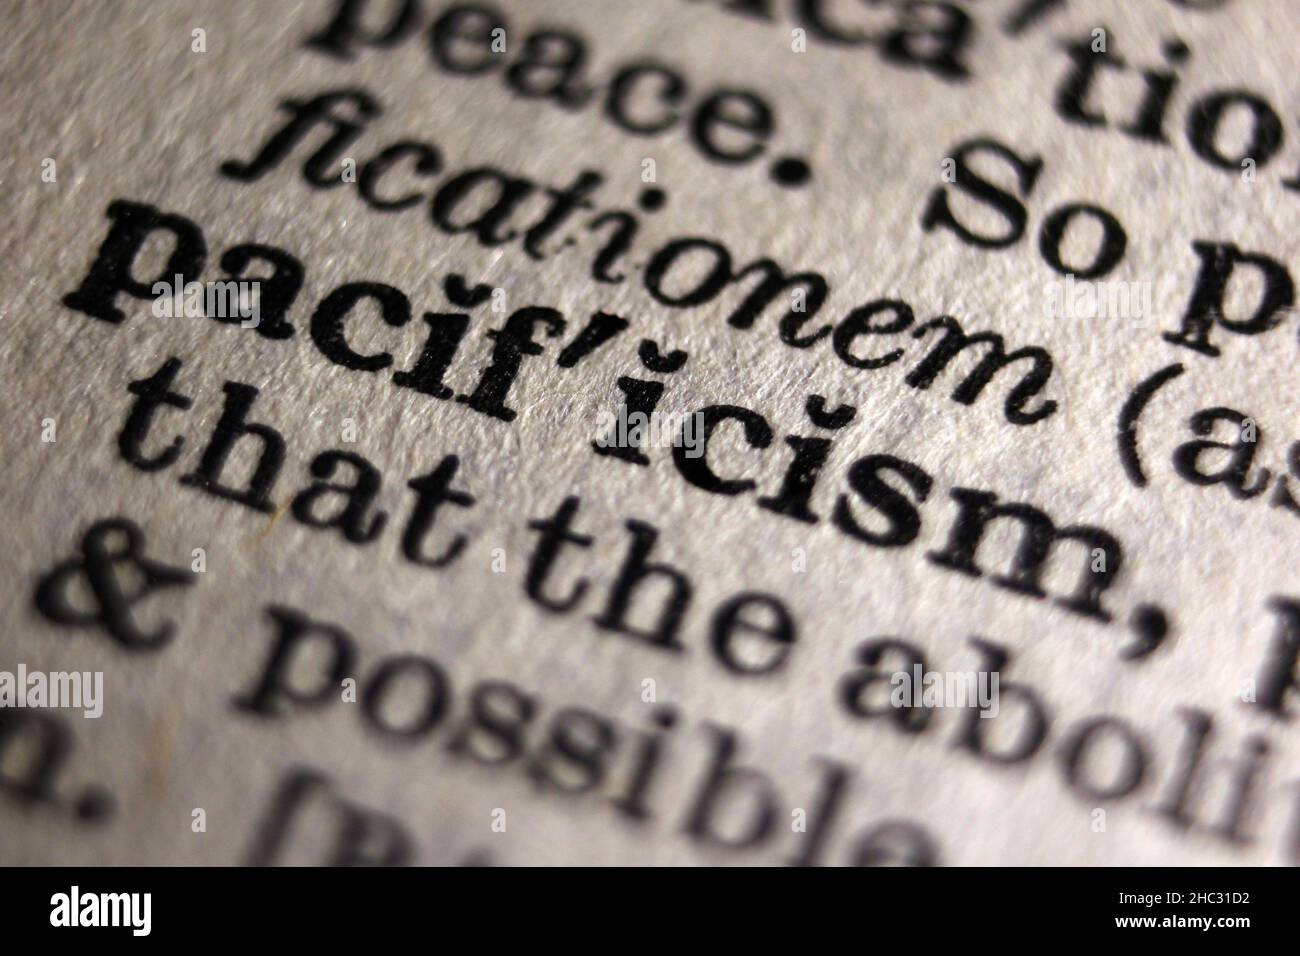 Word 'pacificism' printed on book page, macro close-up Stock Photo